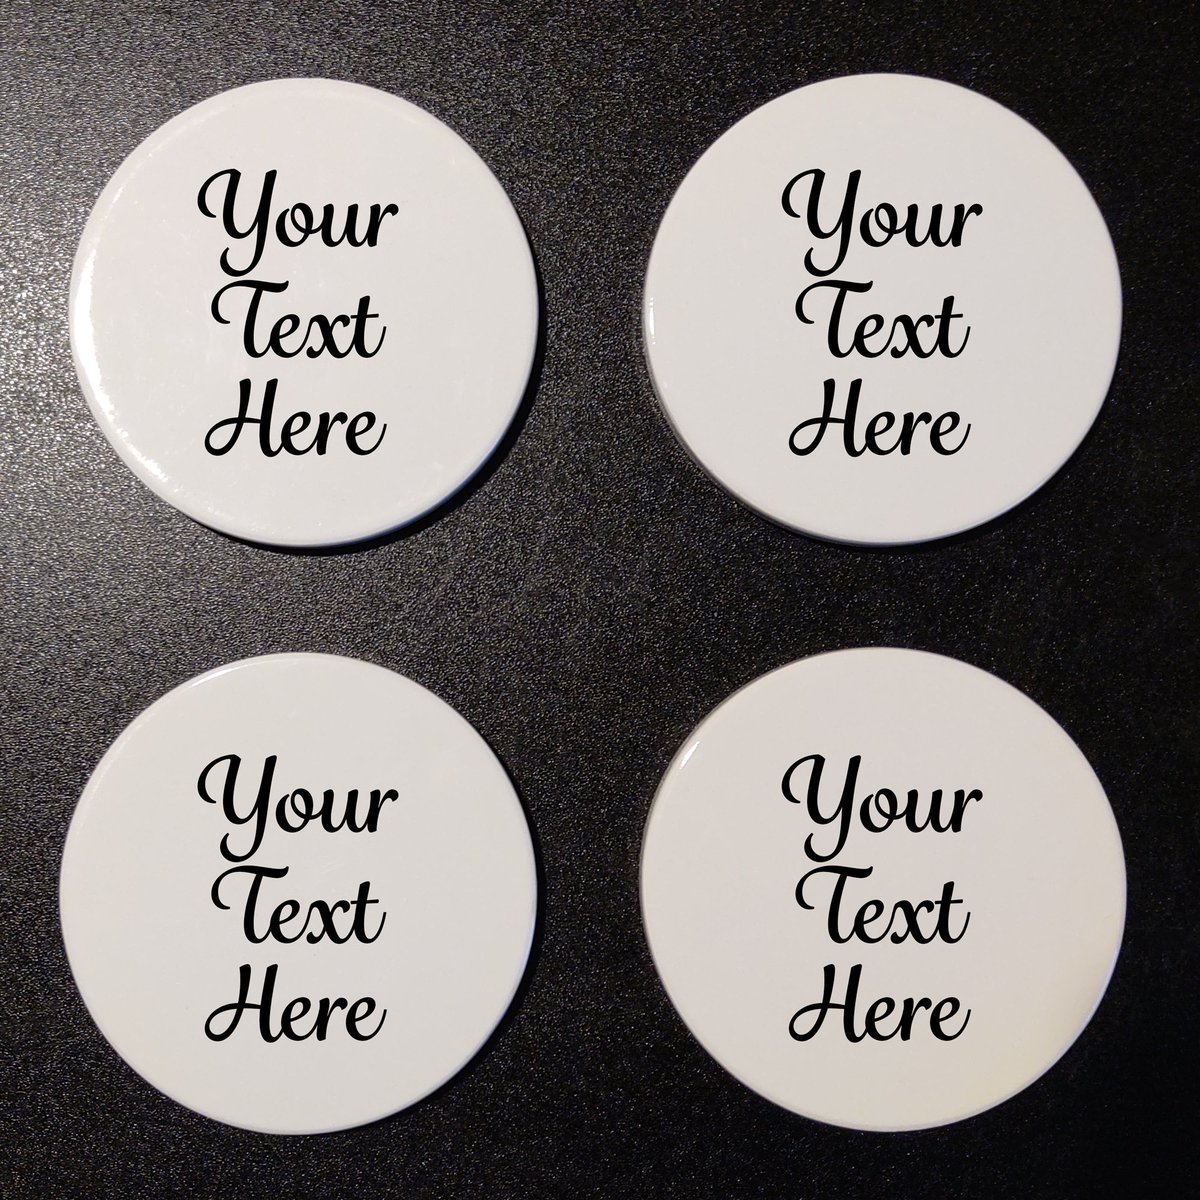 New to my #Etsy Shop!!! ✨  Check out my Personalized Text Round Ceramic Drink Coasters! 

etsy.com/listing/146674…
.
.
.
#etsyseller #etsyshop #etsyfinds #etsygifts #shopsmall #coaster #coasters #drinkcoaster #personalized #personalizedgifts